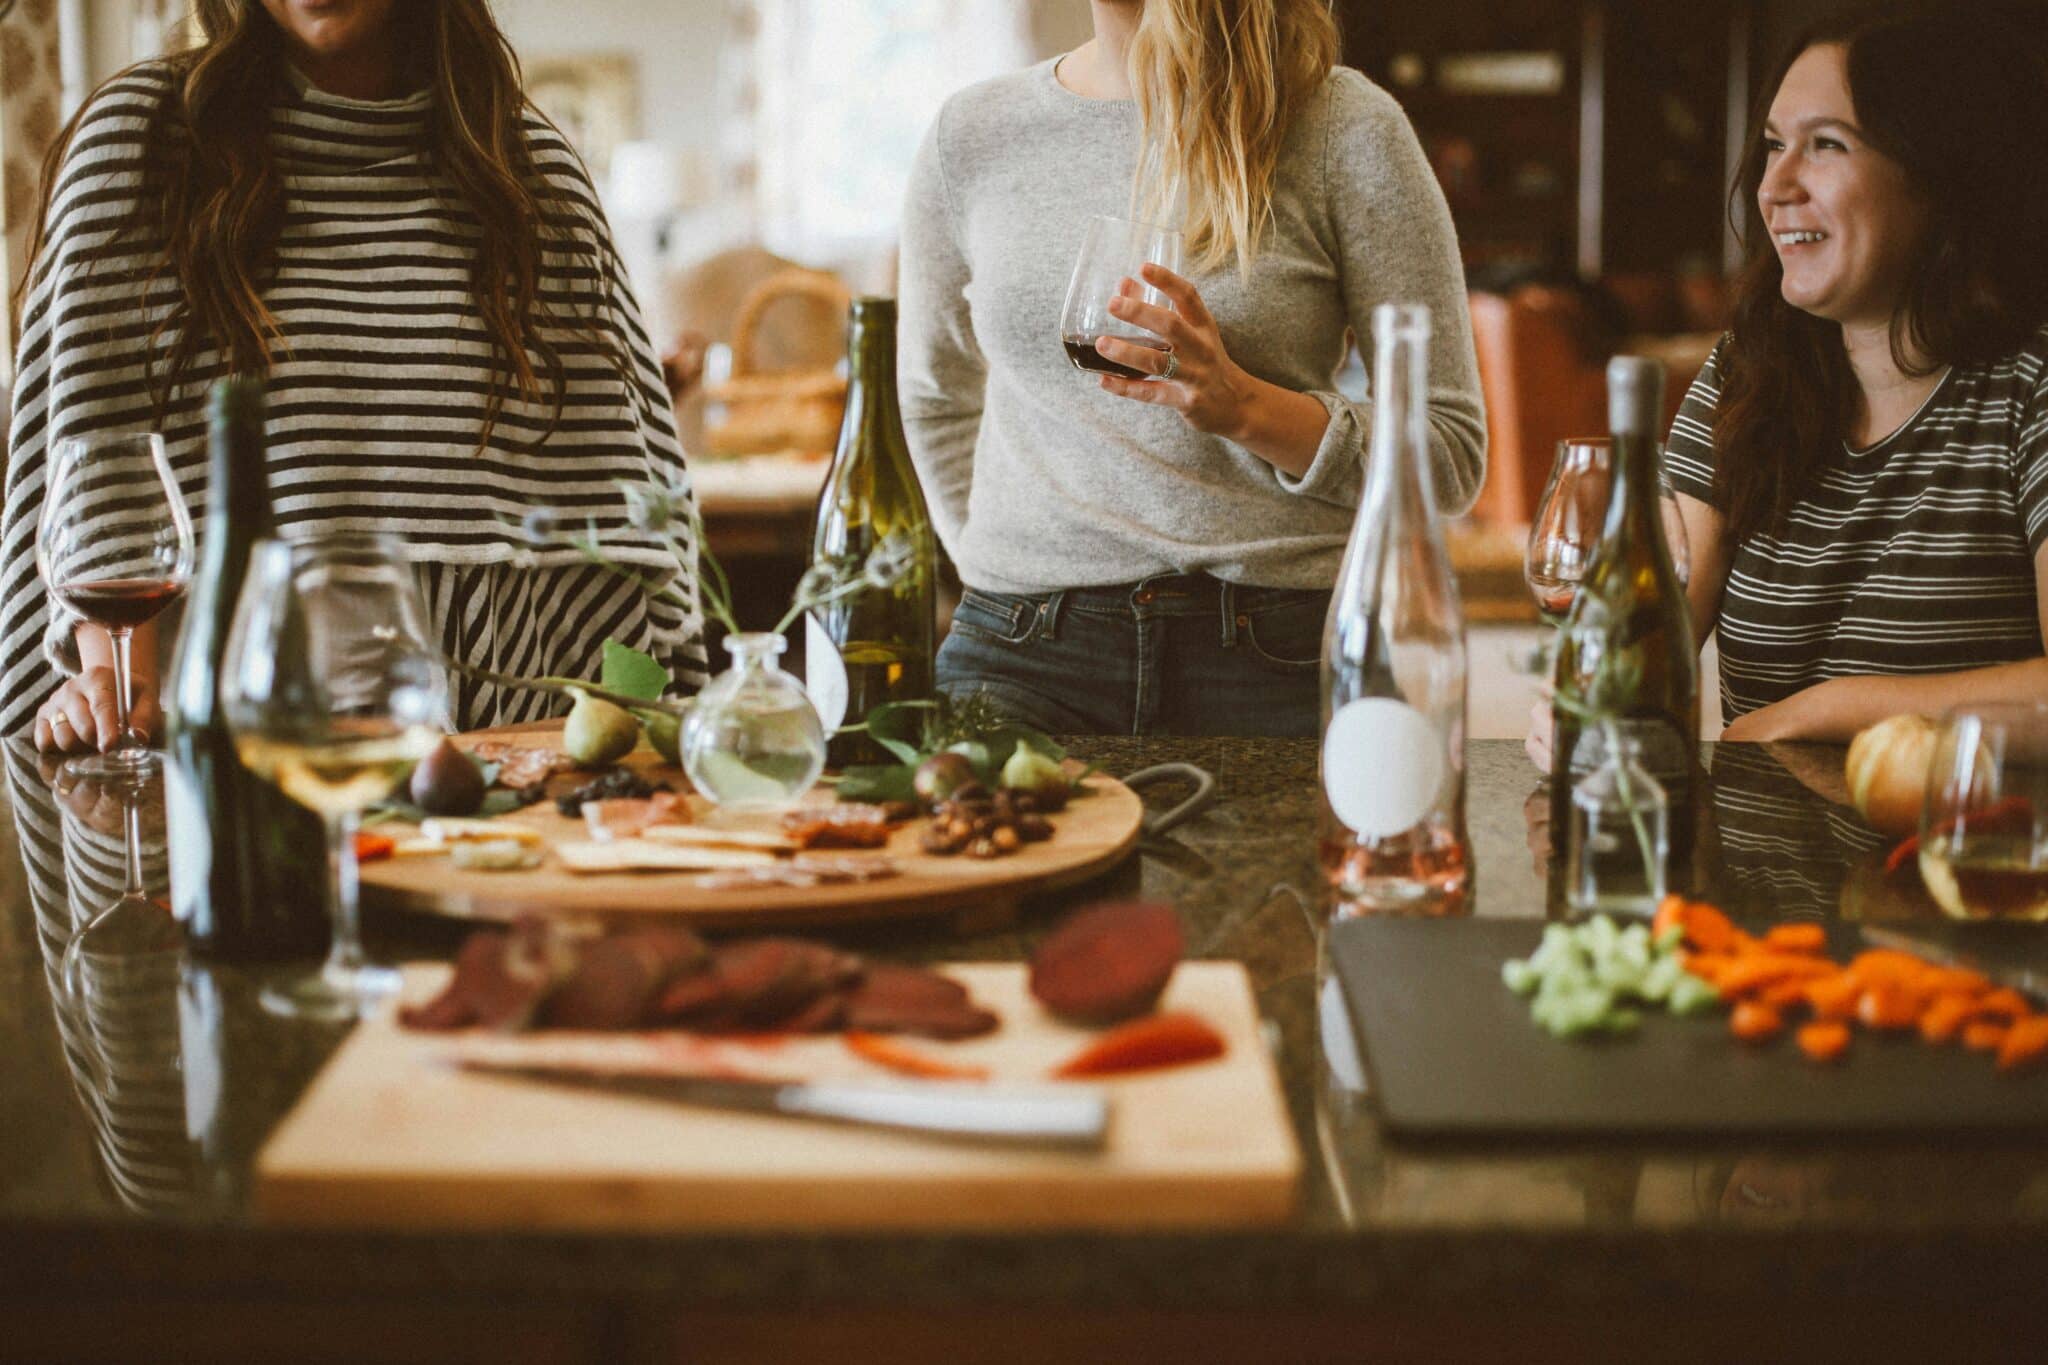 Women in the kitchen laughing | Photo by Kelsey Chance on Unsplash